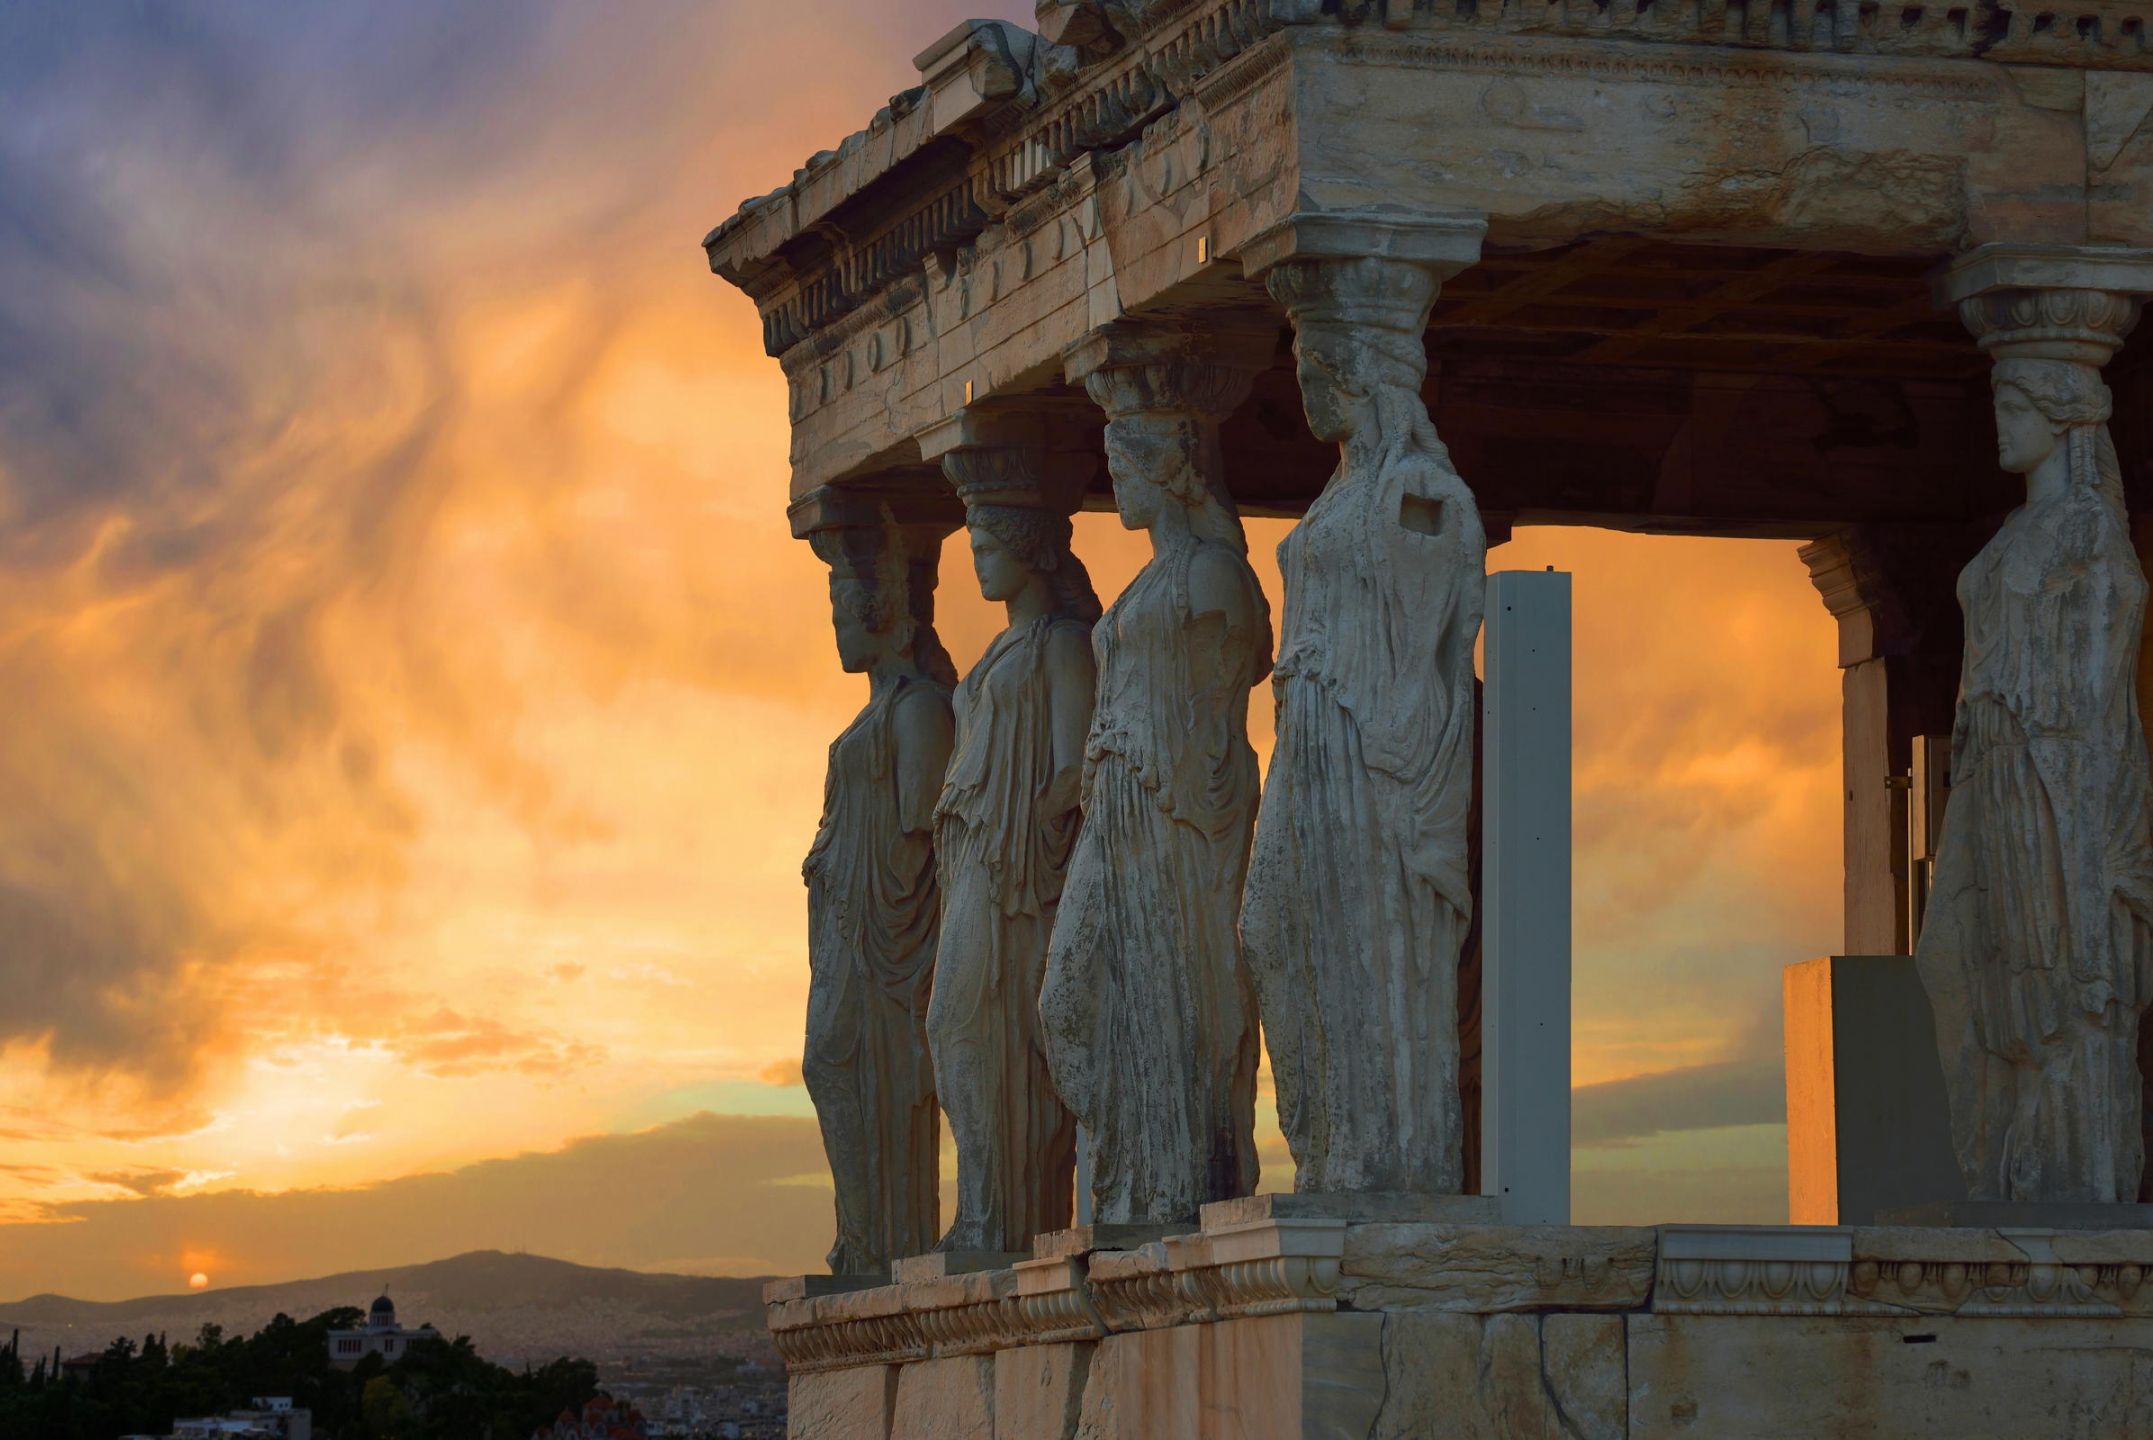 local tour operators in athens greece